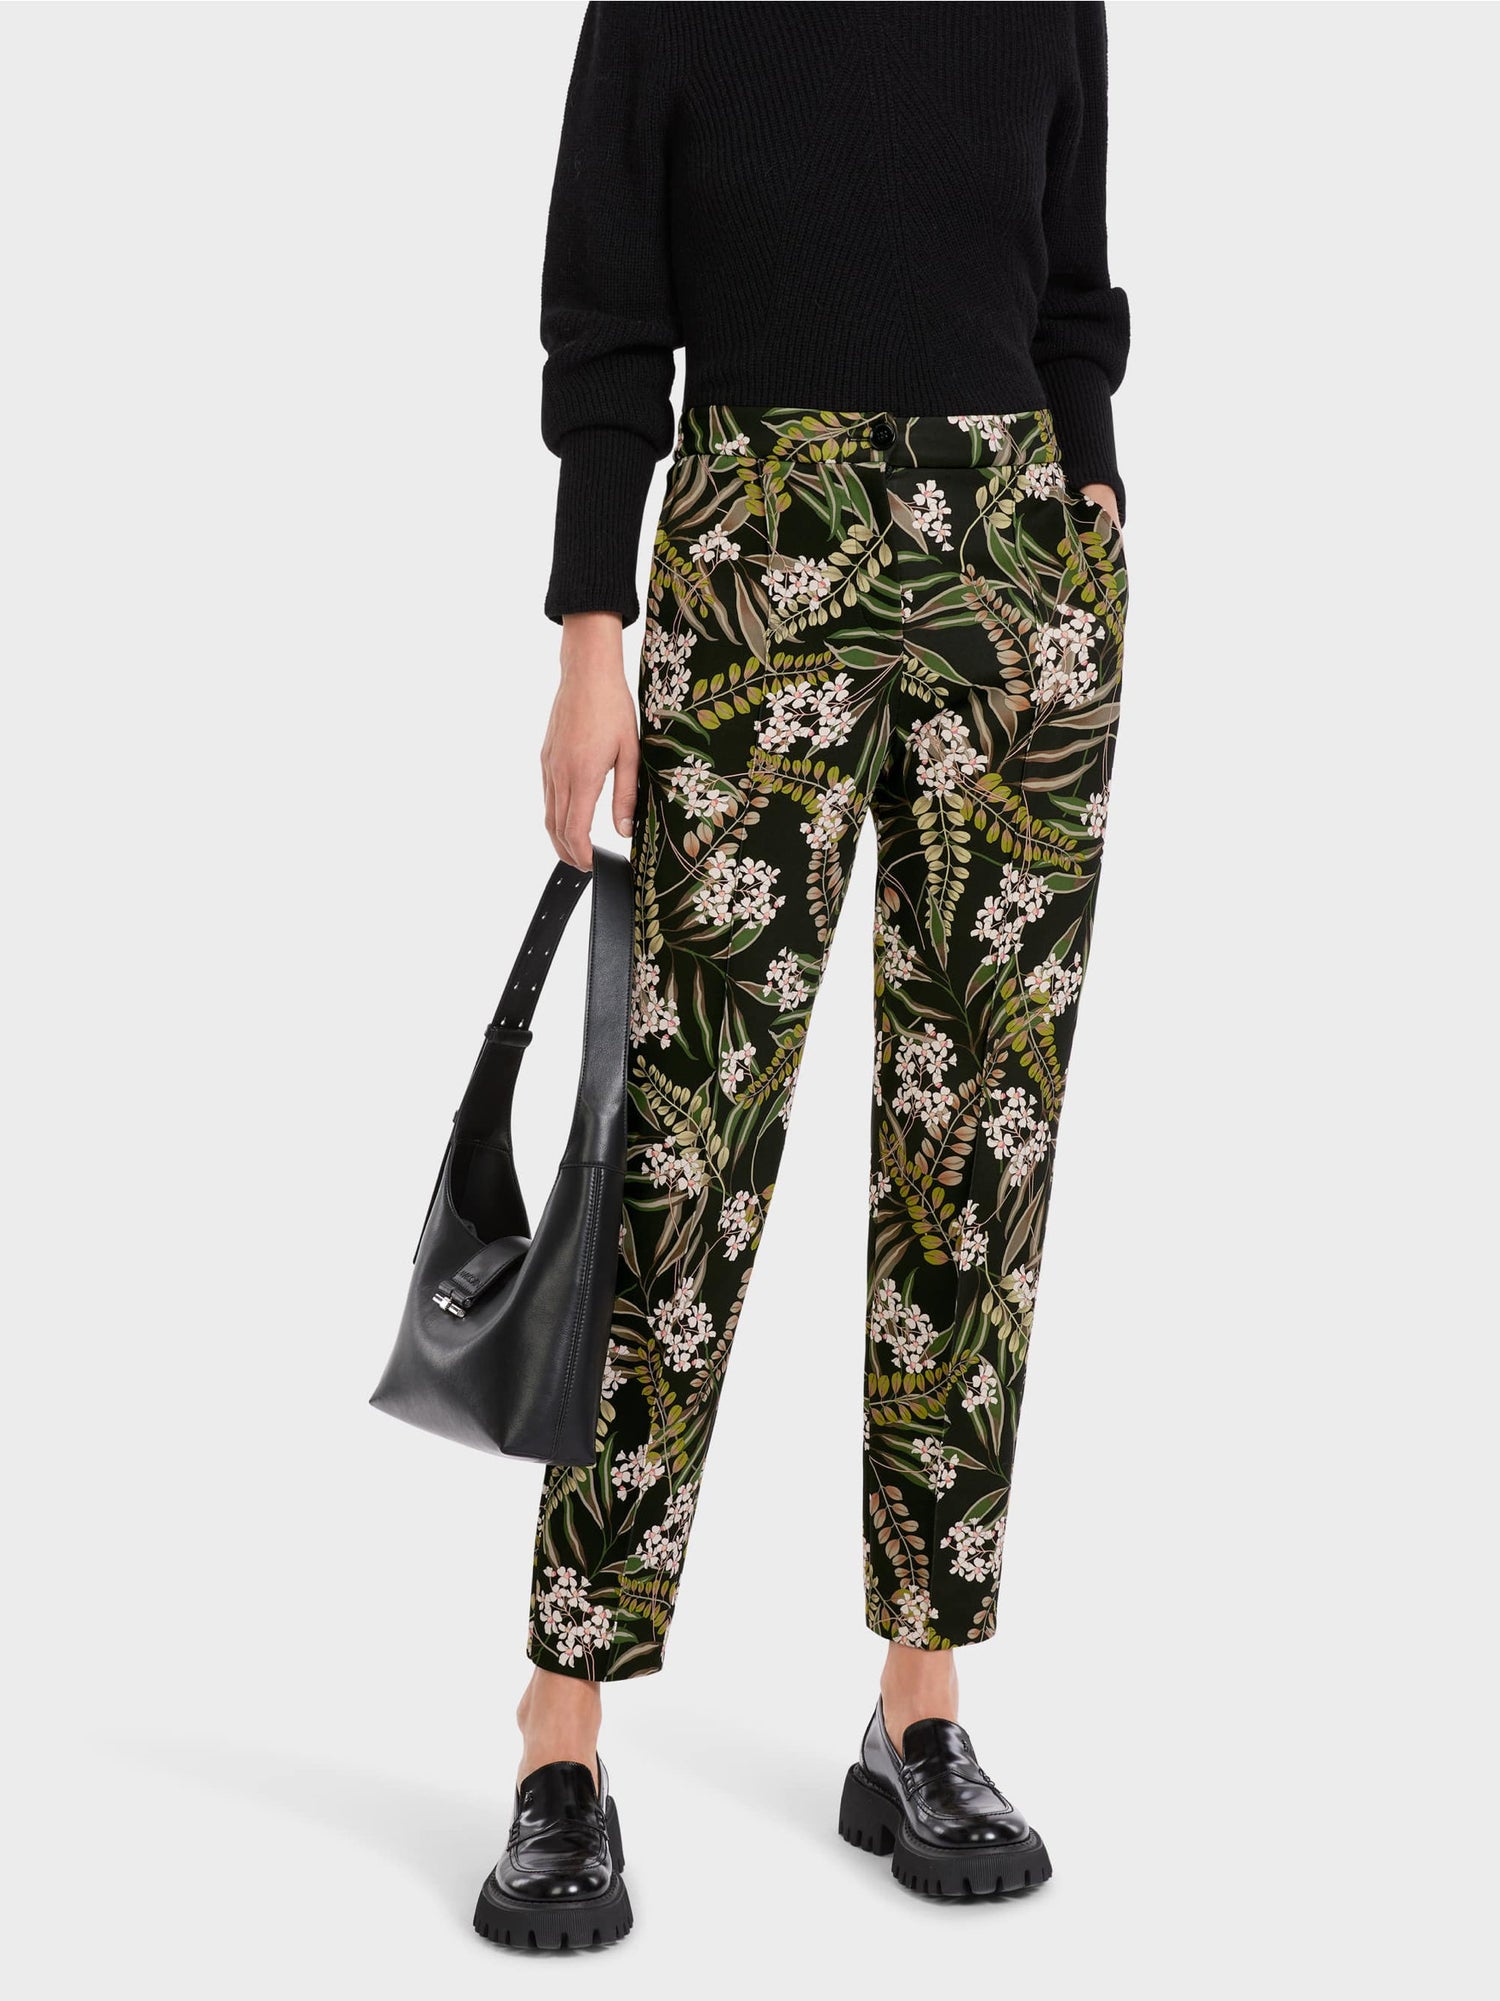 Fordon Jersey Pants With All-Over Print_VC 81.63 J37_900_04